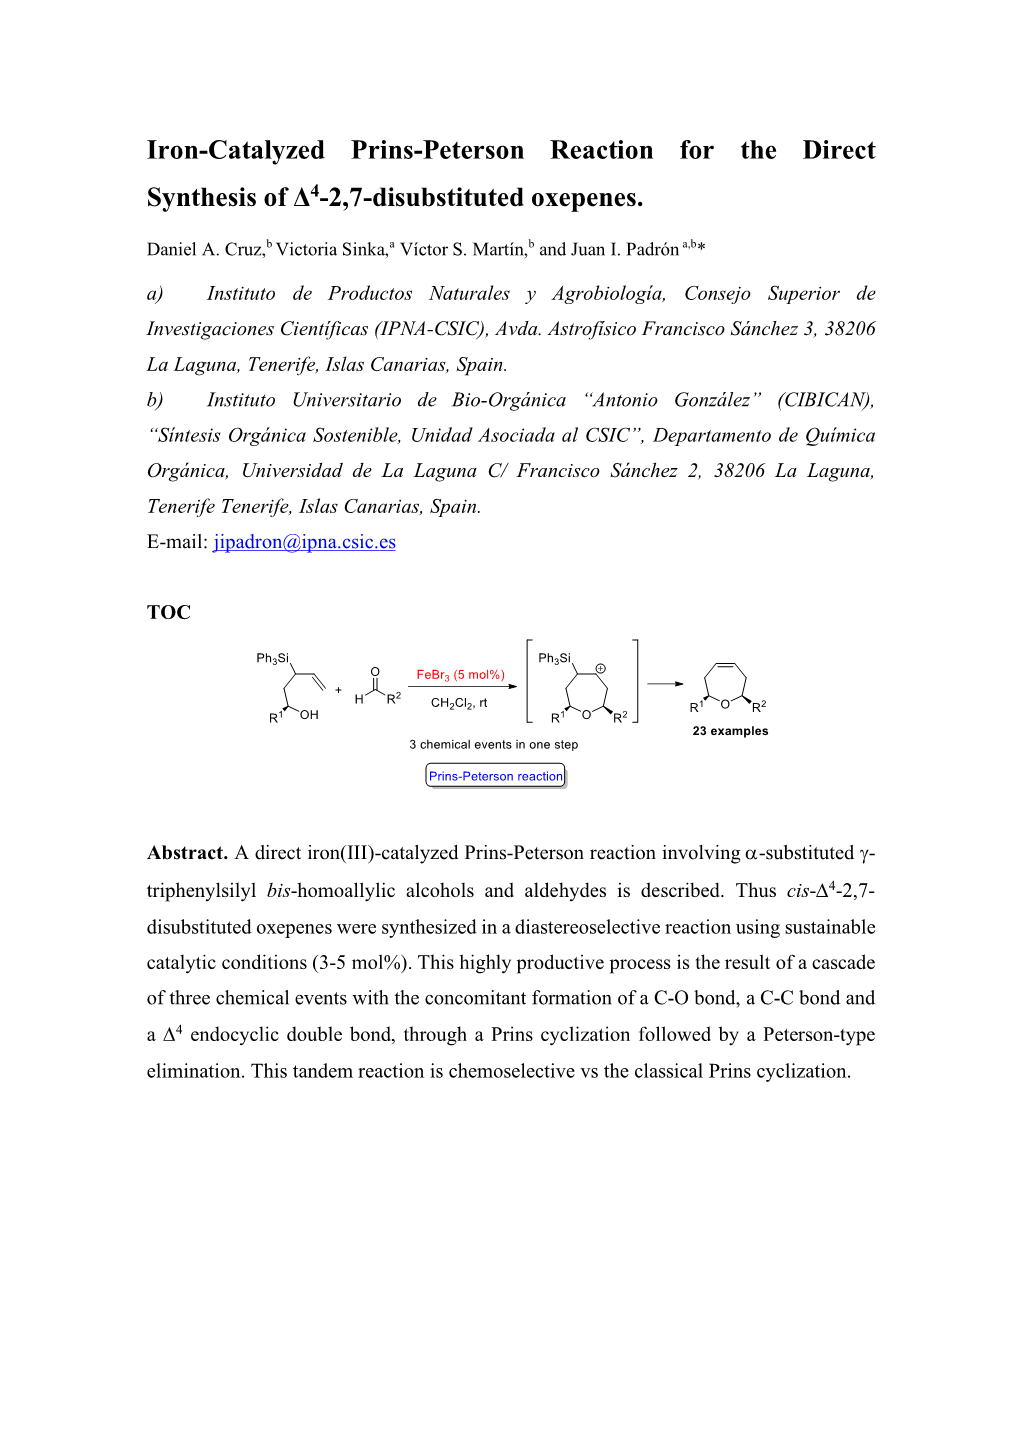 Iron-Catalyzed Prins-Peterson Reaction for the Direct Synthesis of Δ4-2,7-Disubstituted Oxepenes